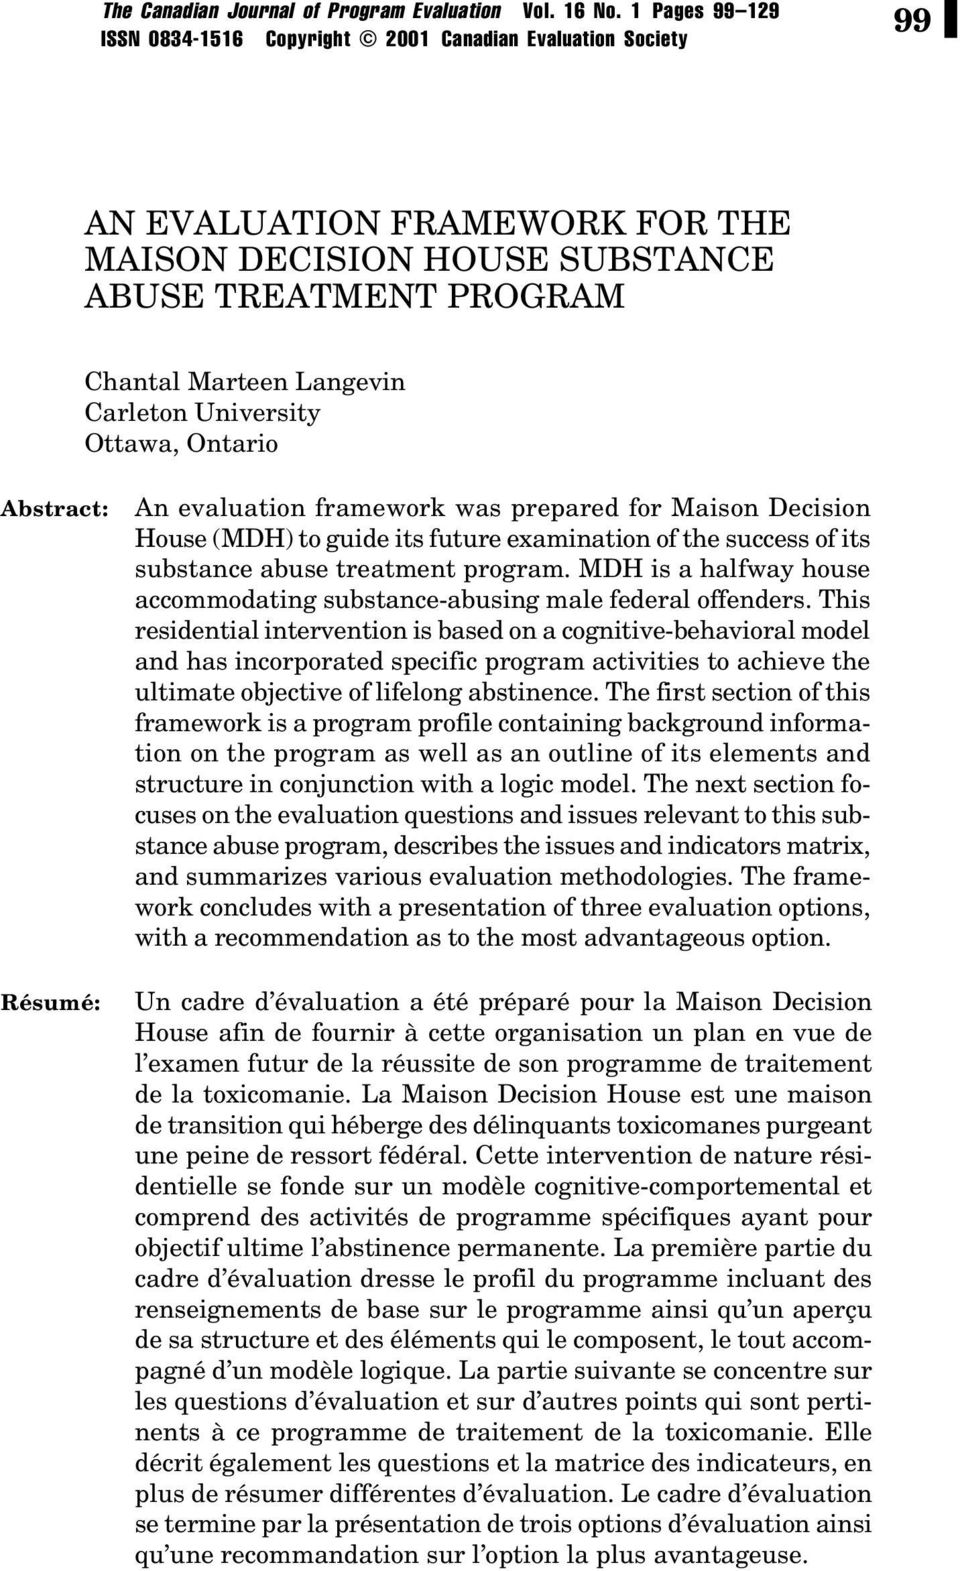 University Ottawa, Ontario Abstract: Résumé: An evaluation framework was prepared for Maison Decision House (MDH) to guide its future examination of the success of its substance abuse treatment